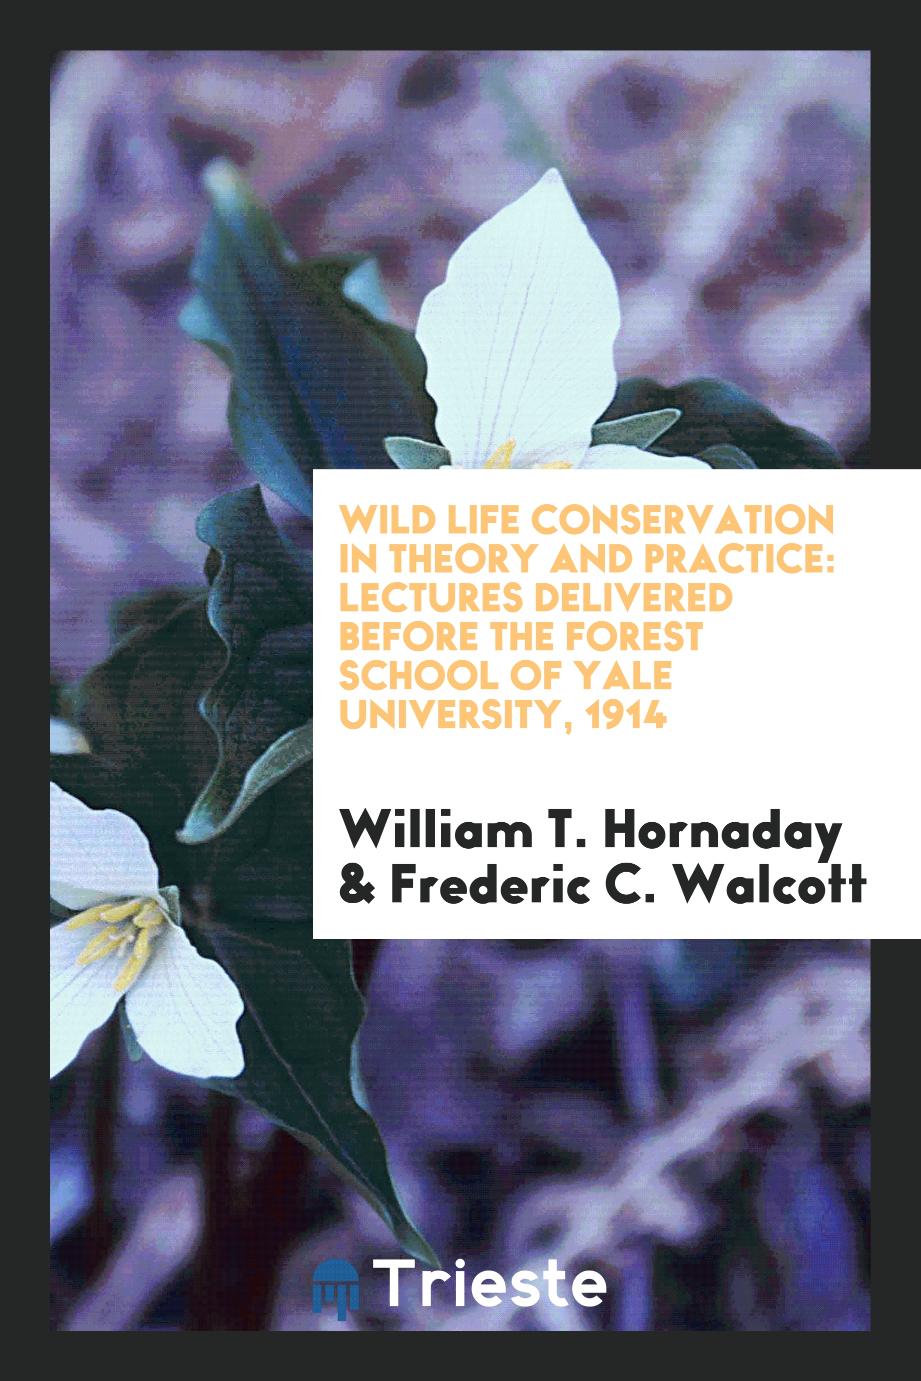 Wild life conservation in theory and practice: lectures delivered before the Forest School of Yale University, 1914